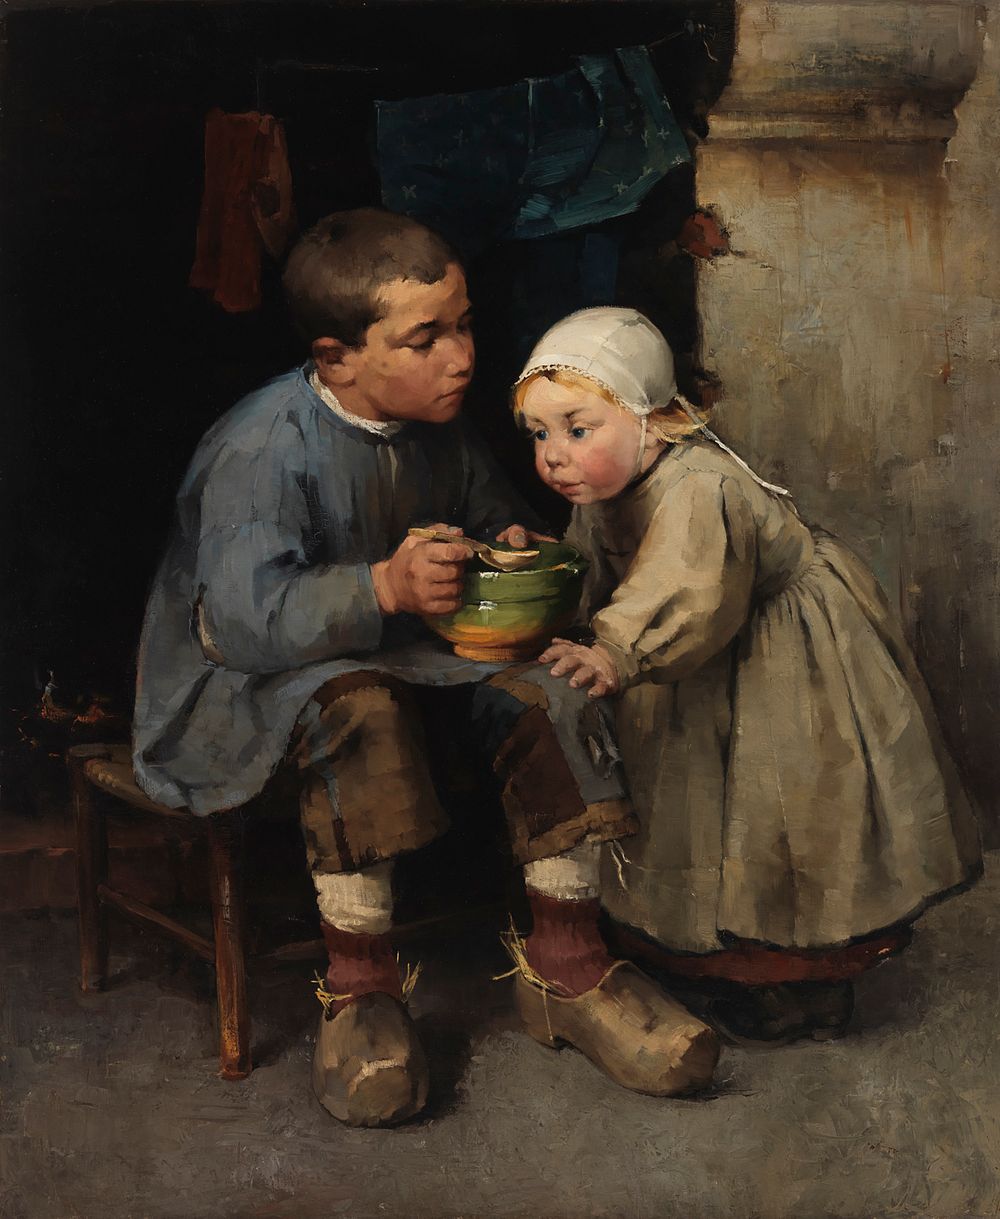 A boy feeding his little sister, 1881 by Helene Schjerfbeck